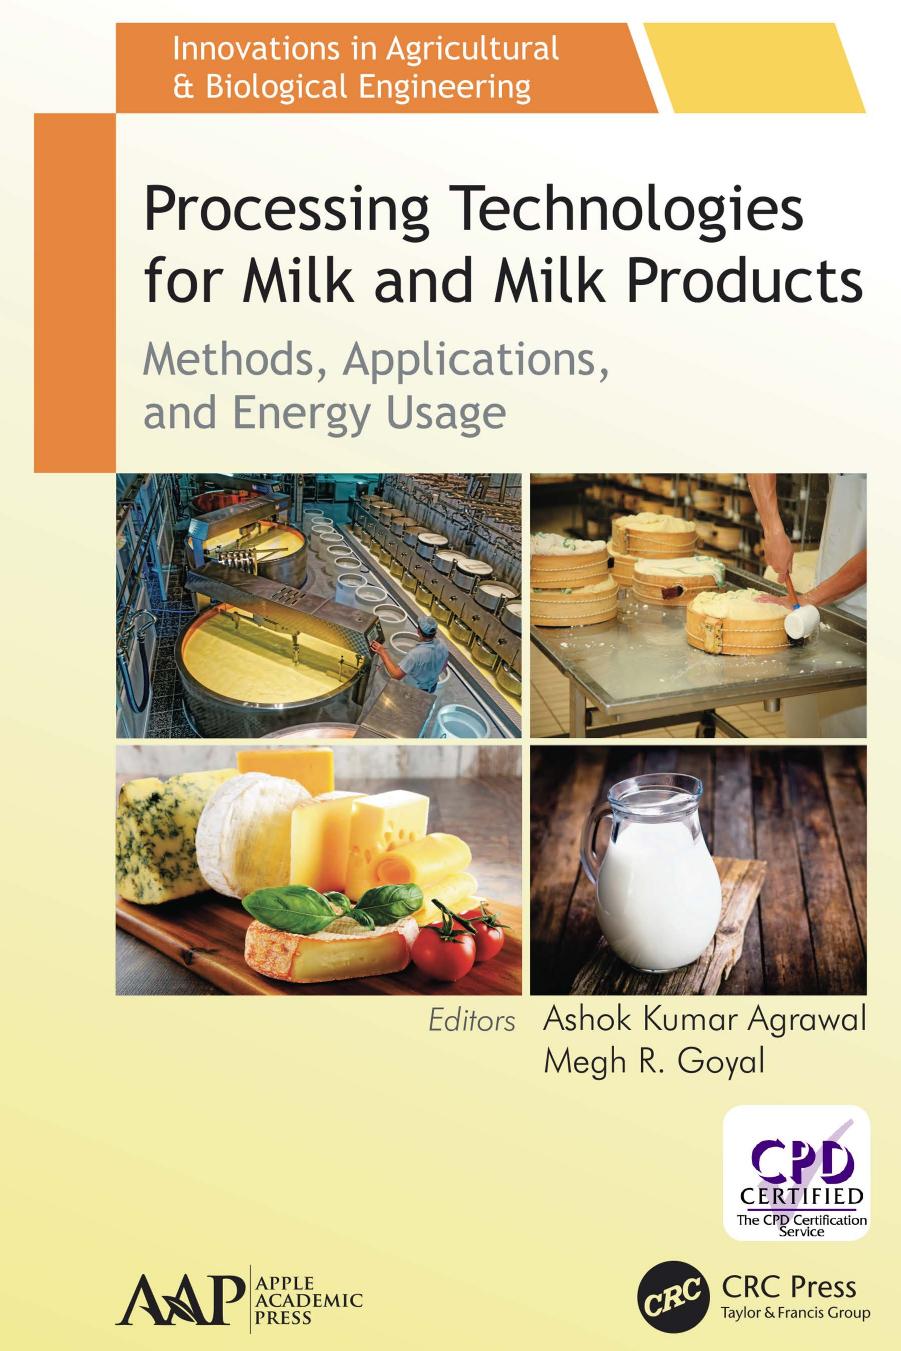 PROCESSING TECHNOLOGIES FOR MILK AND MILK PRODUCTS